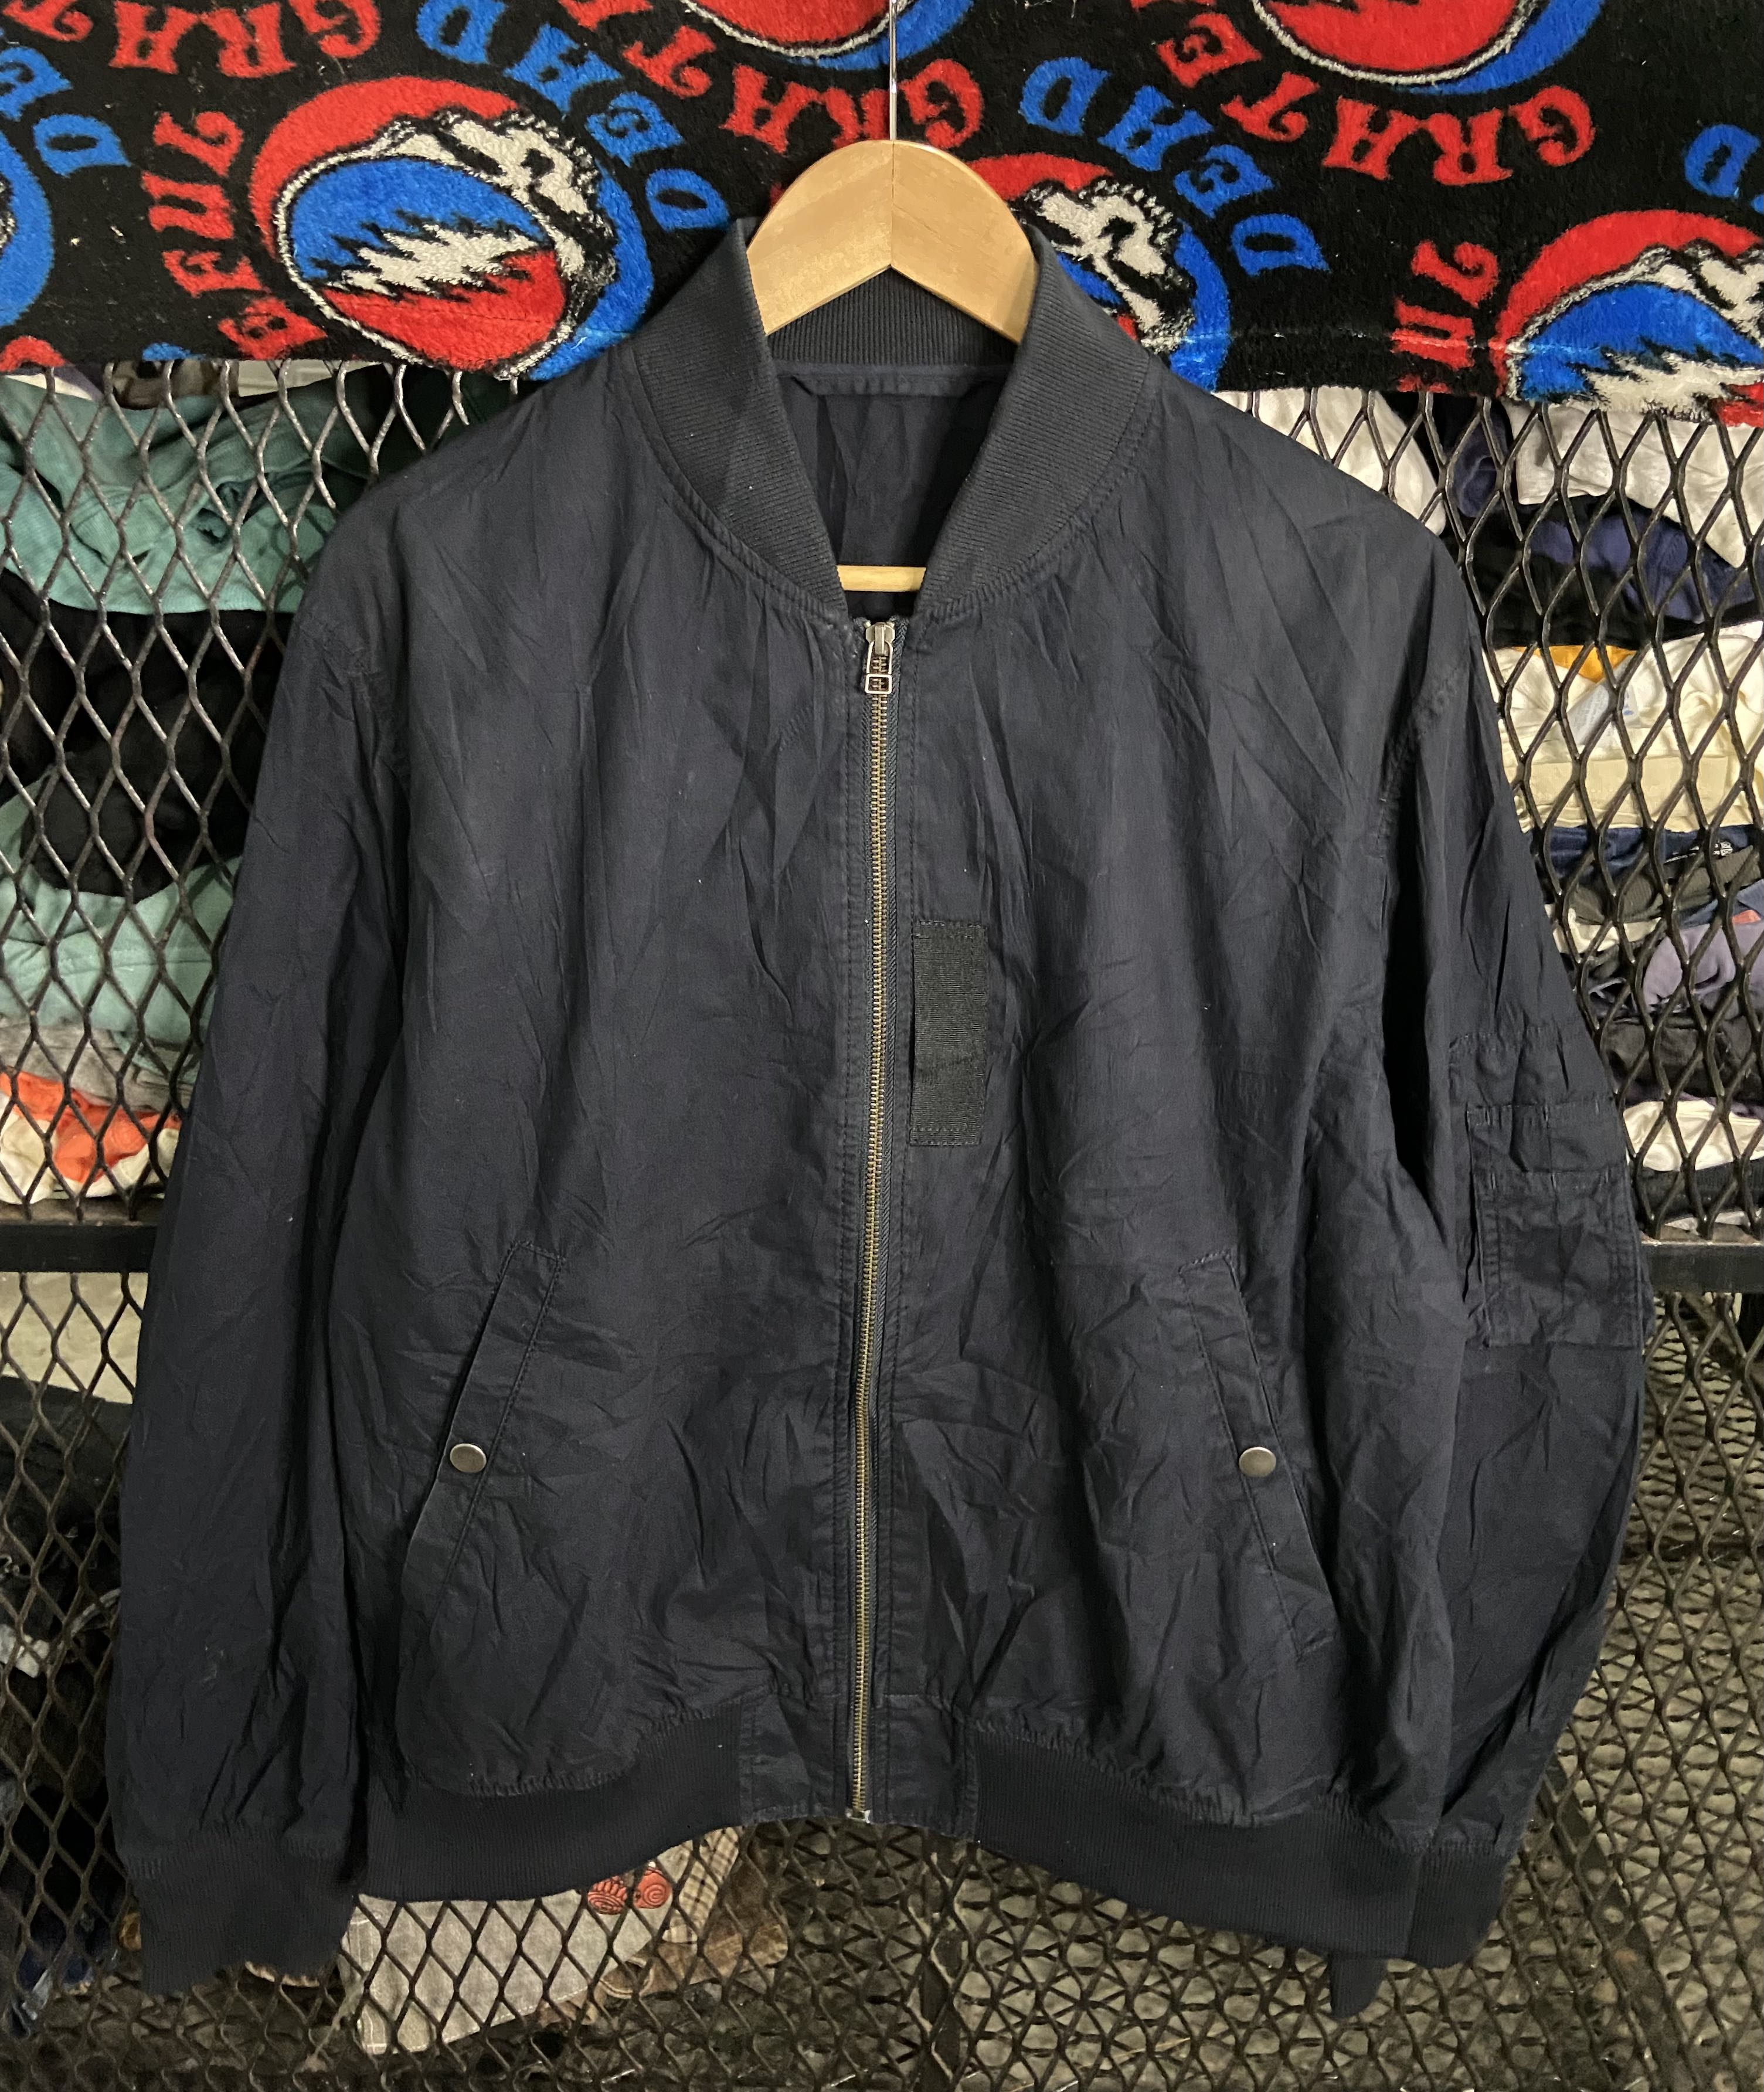 Gu Bomber Jacket, Men's Fashion, Coats, Jackets and Outerwear on Carousell